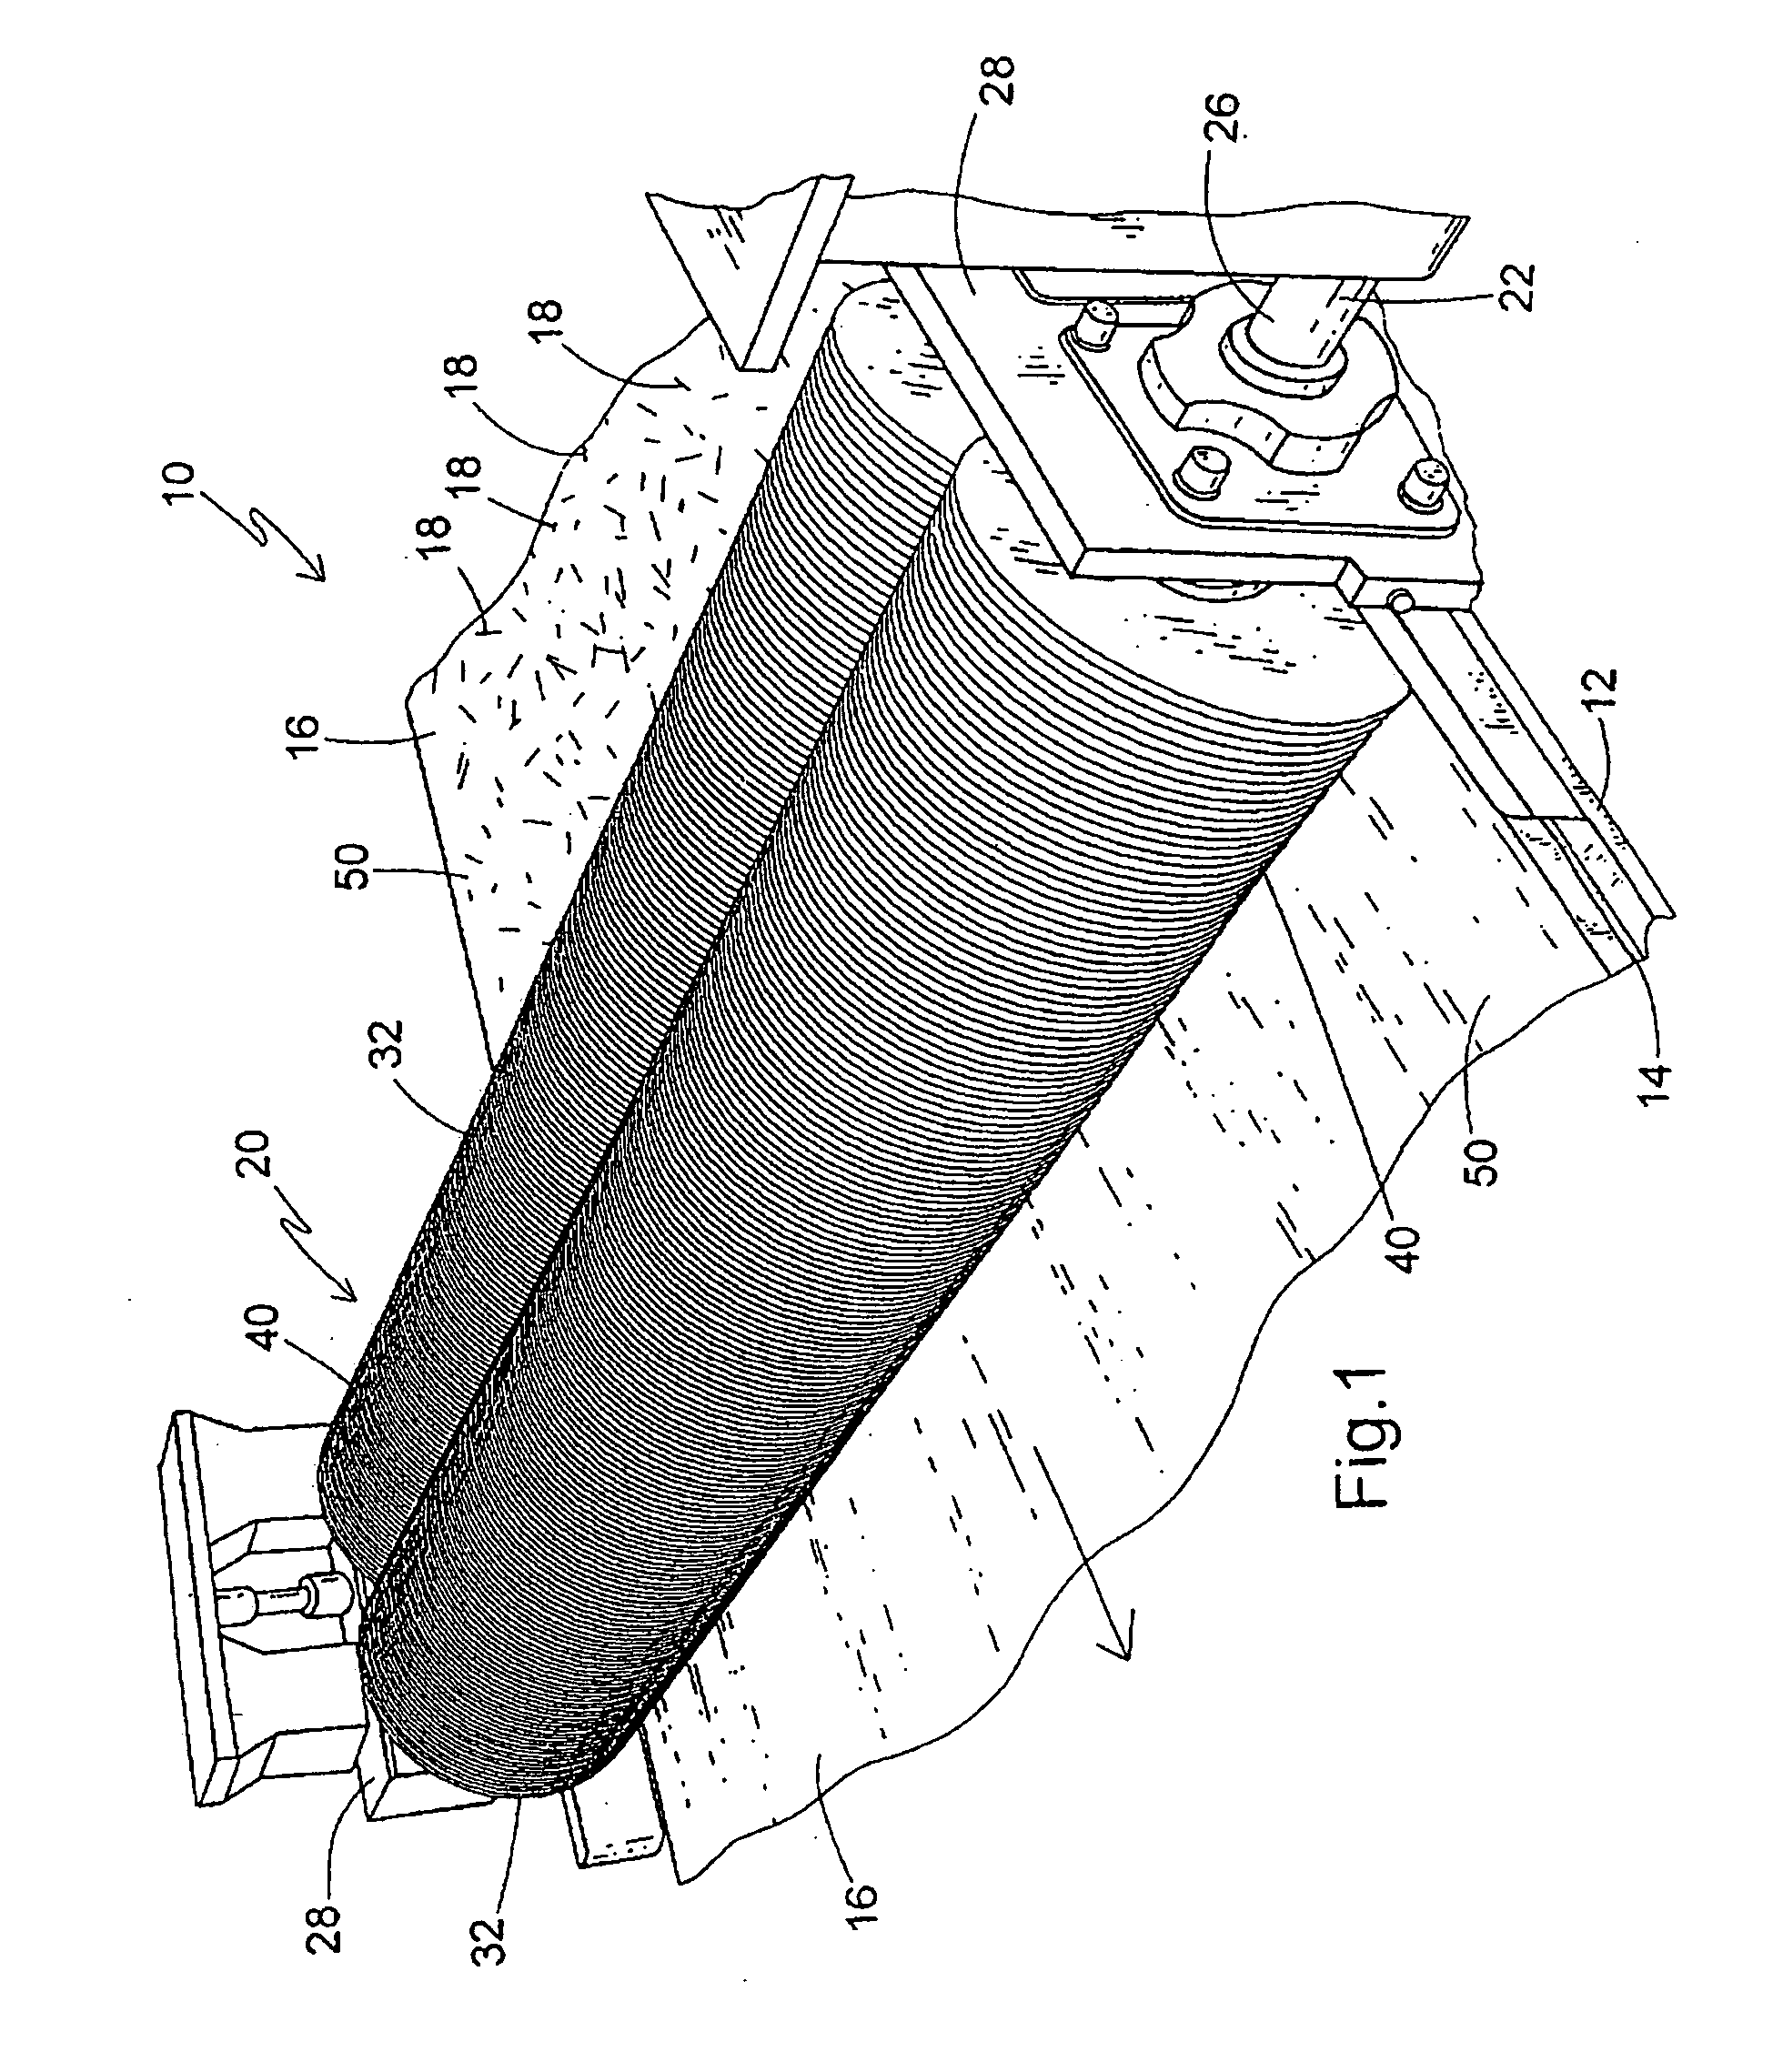 Embedment roll device